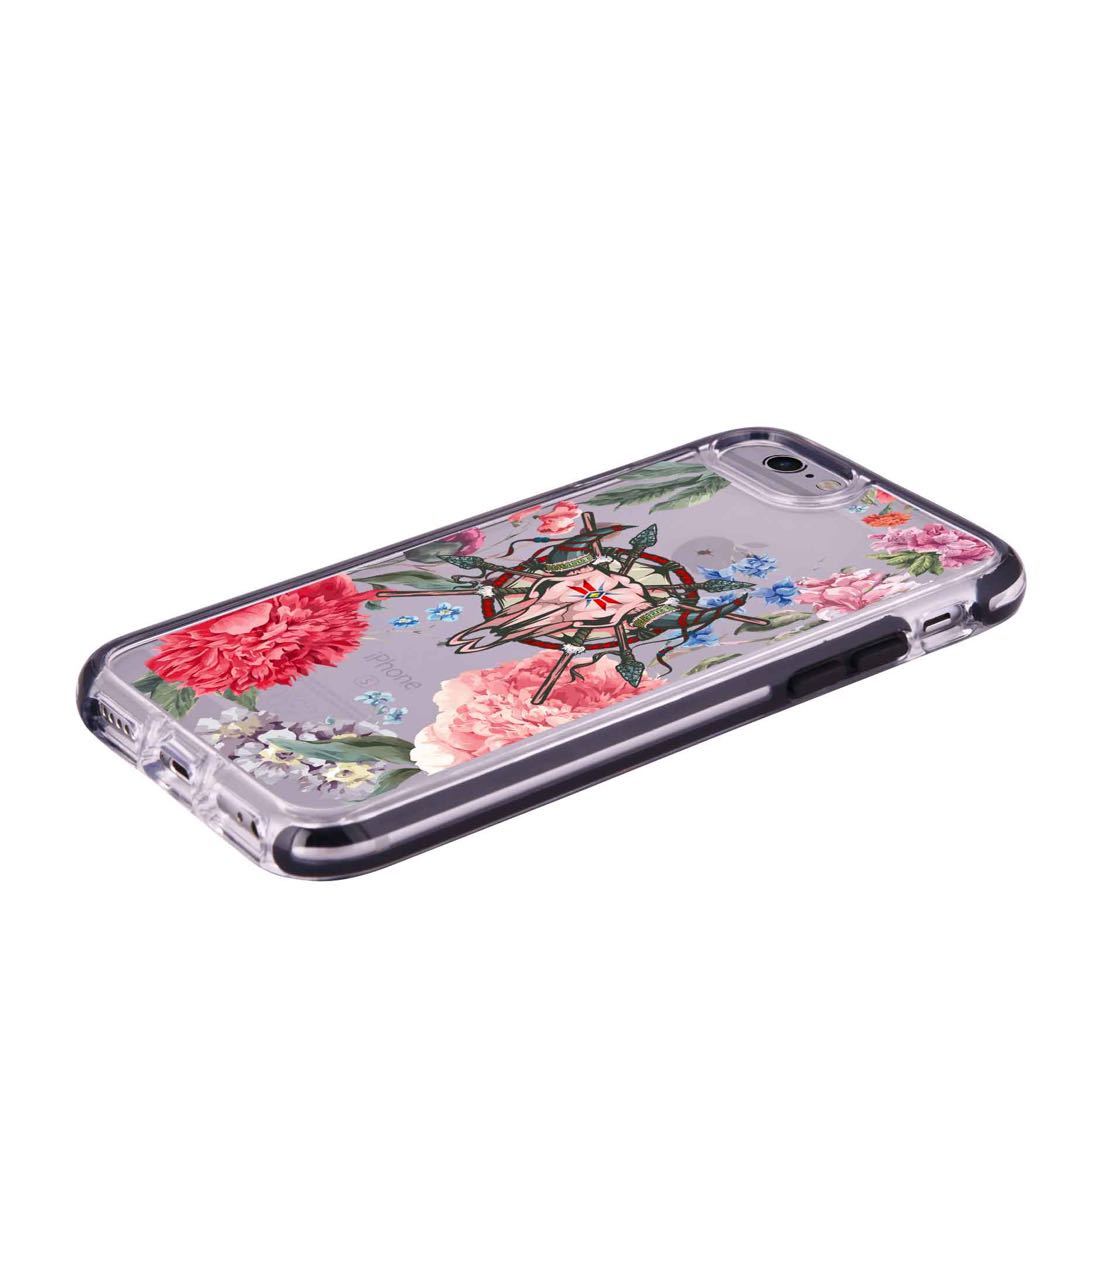 Floral Symmetry - Extreme Phone Case for iPhone 6S Plus